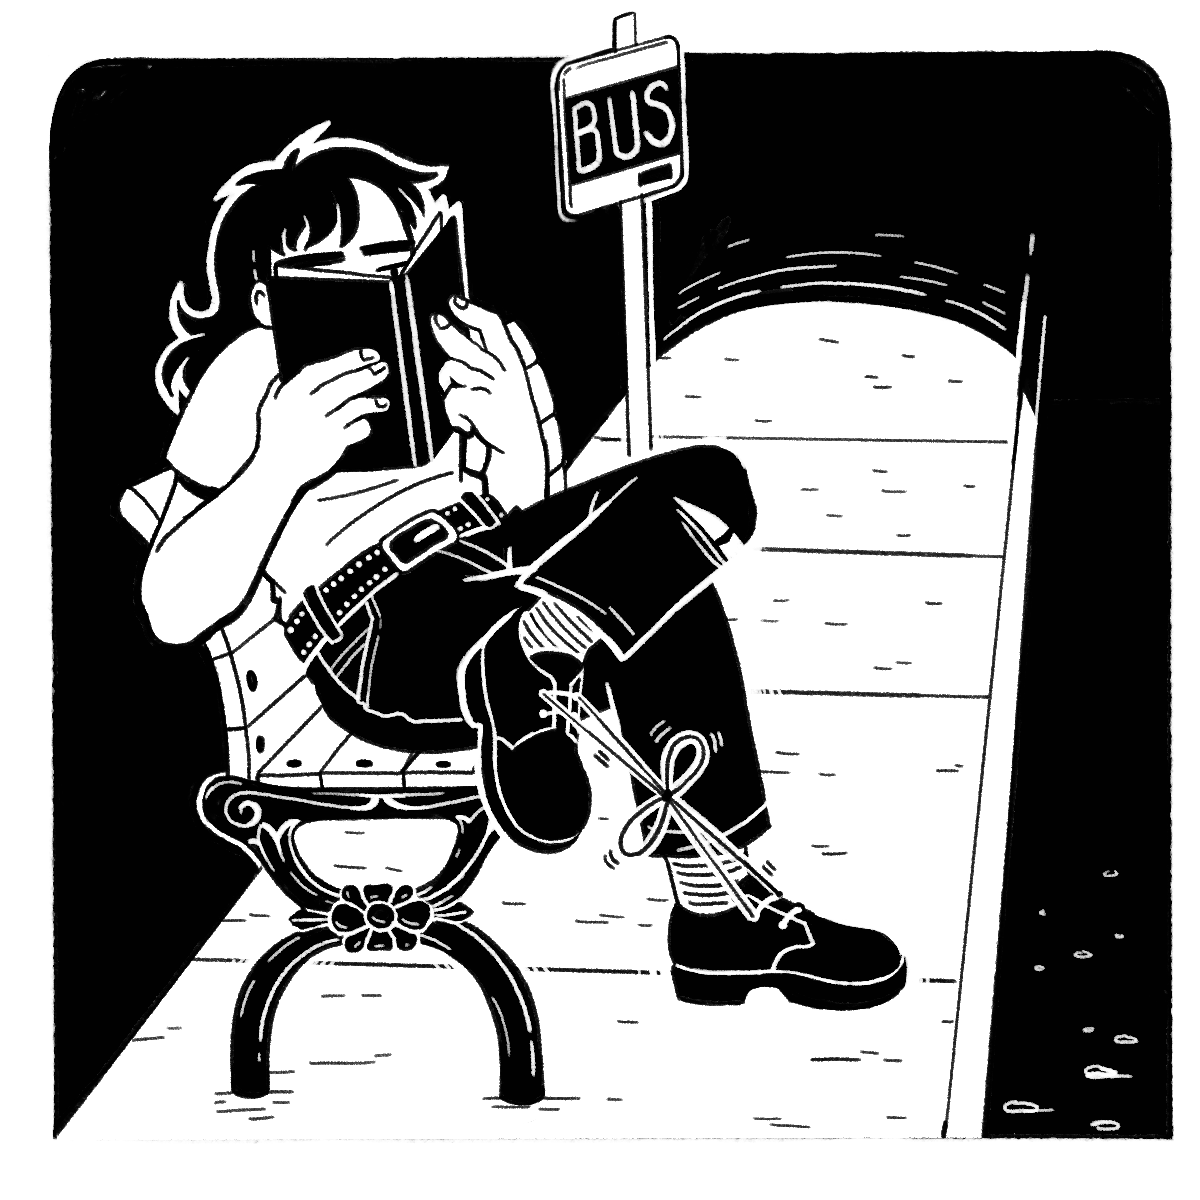 A black and white drawing of a person sitting on a bench at a bus stop. They are holding a book in front of their face and their shoelaces are tied together.